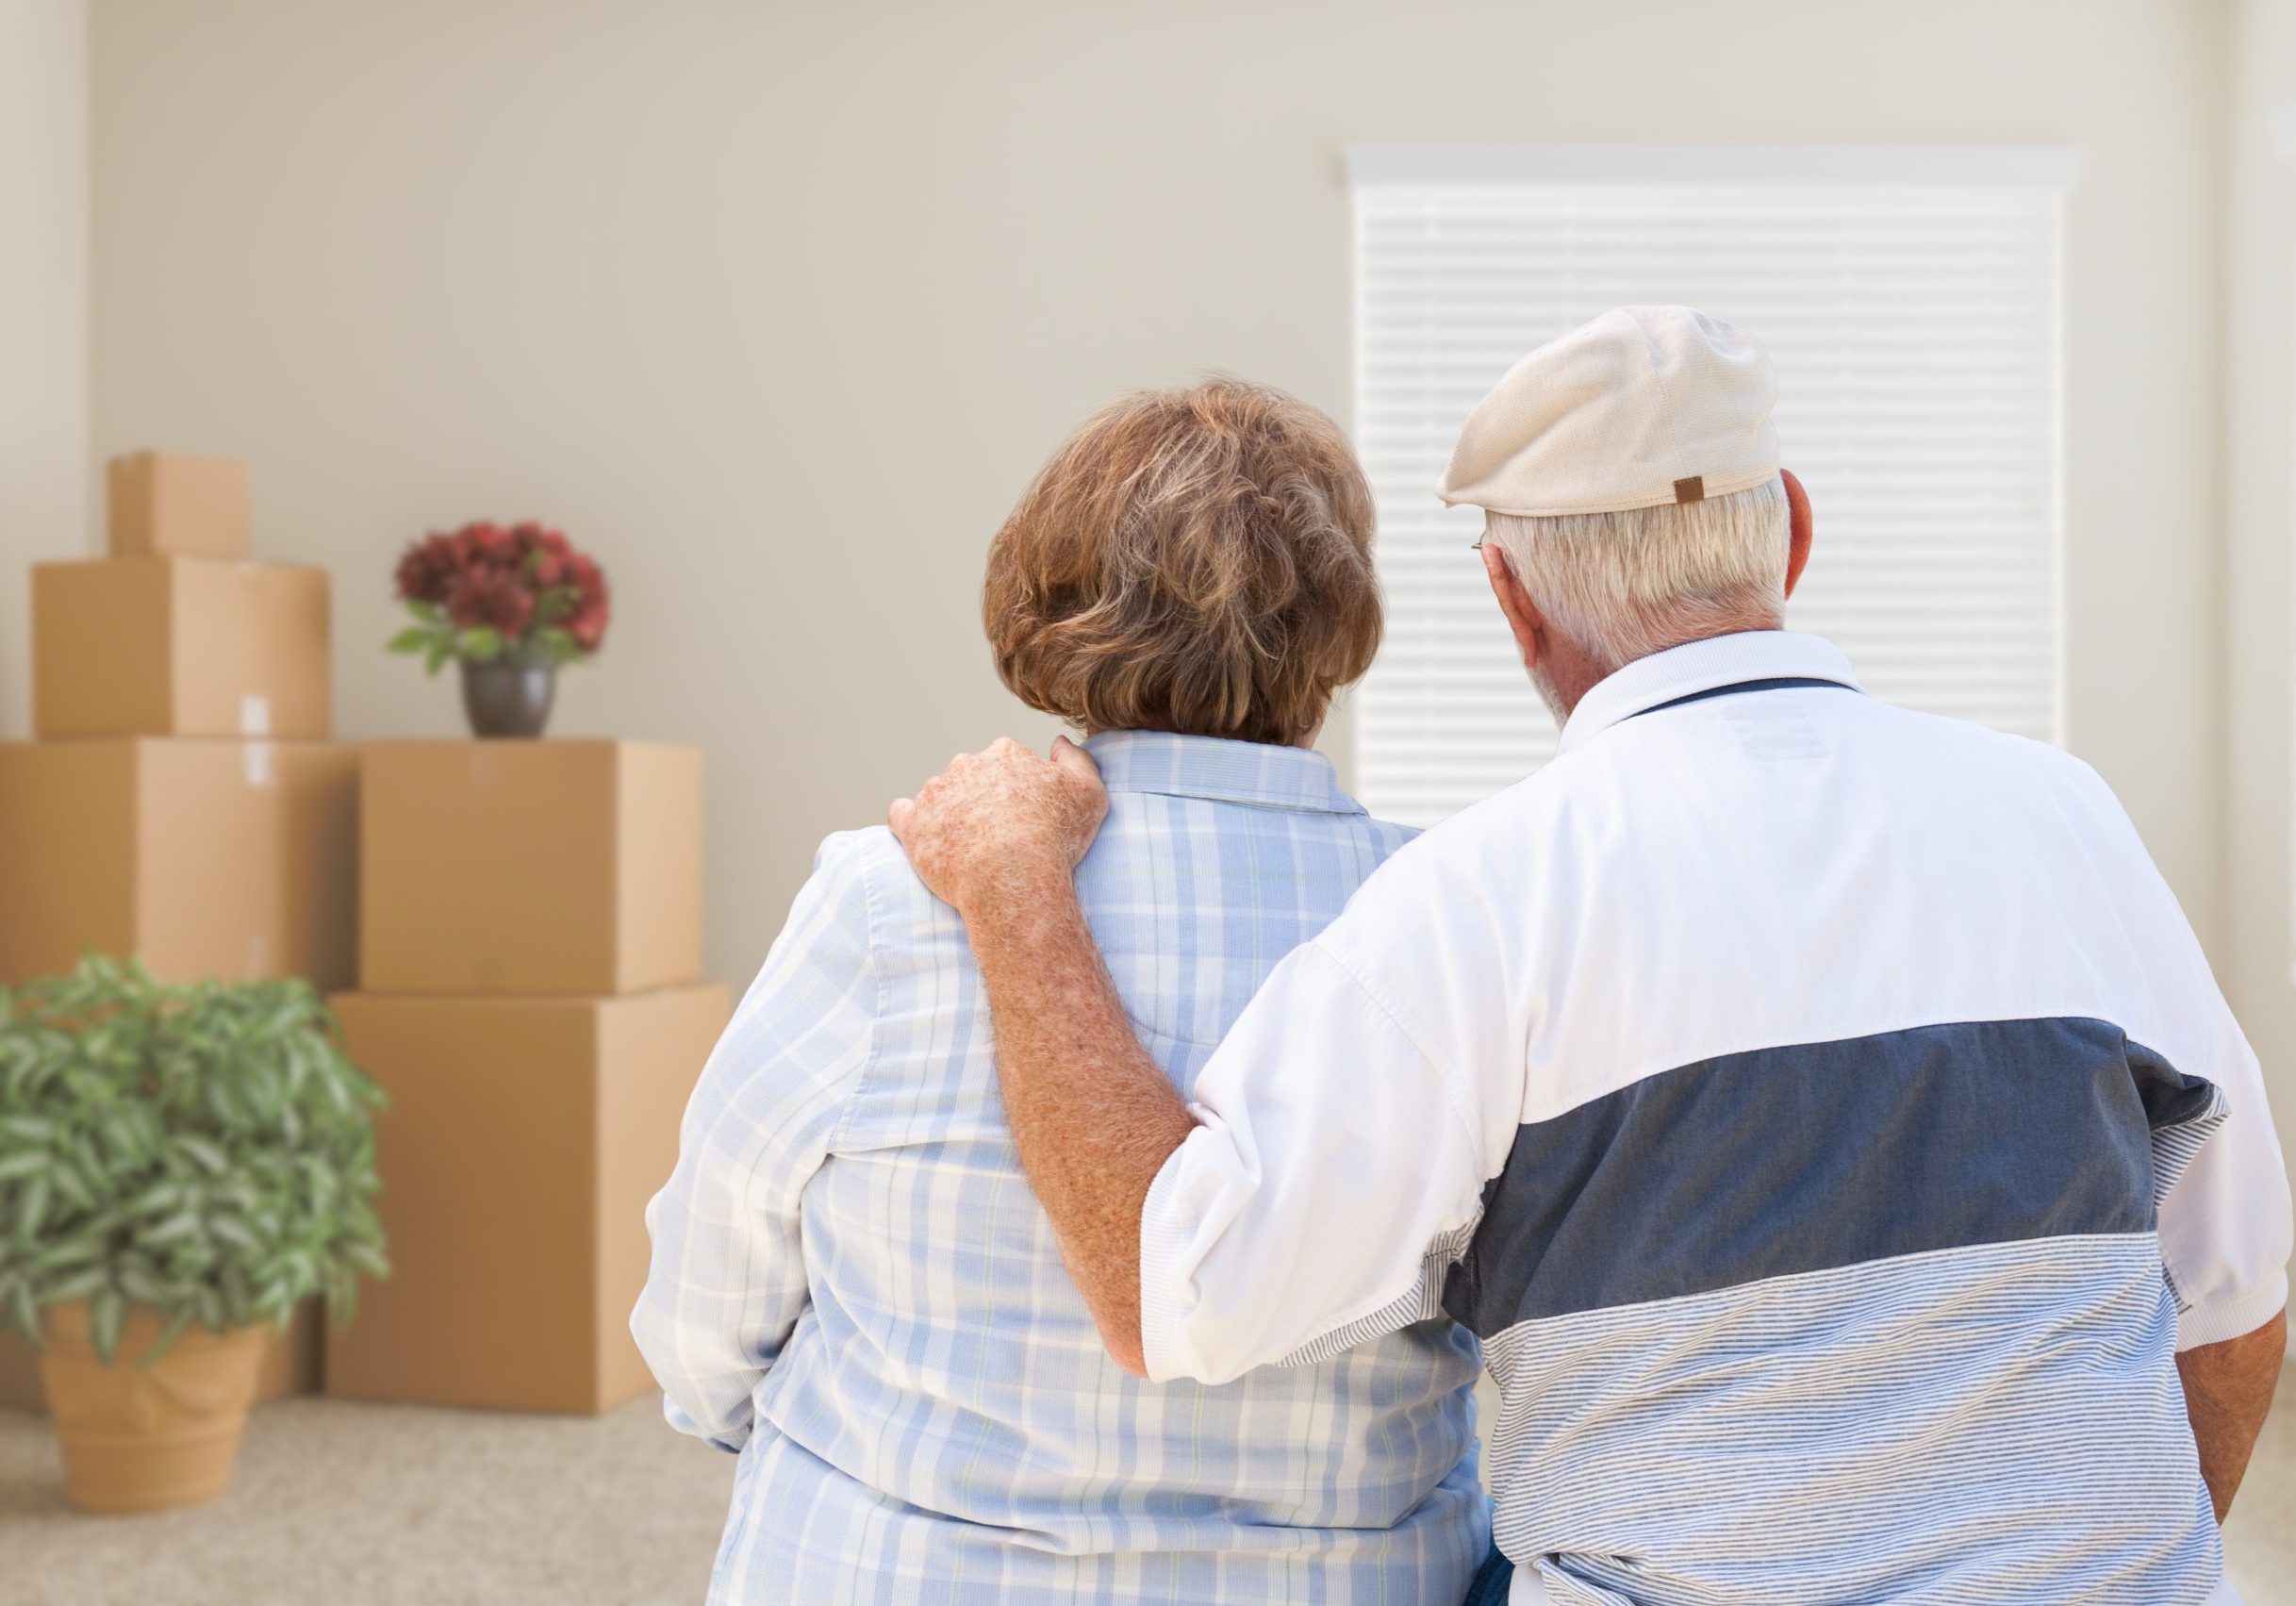 Senior Couple Facing Empty Room with Packed Moving Boxes and Potted Plants.